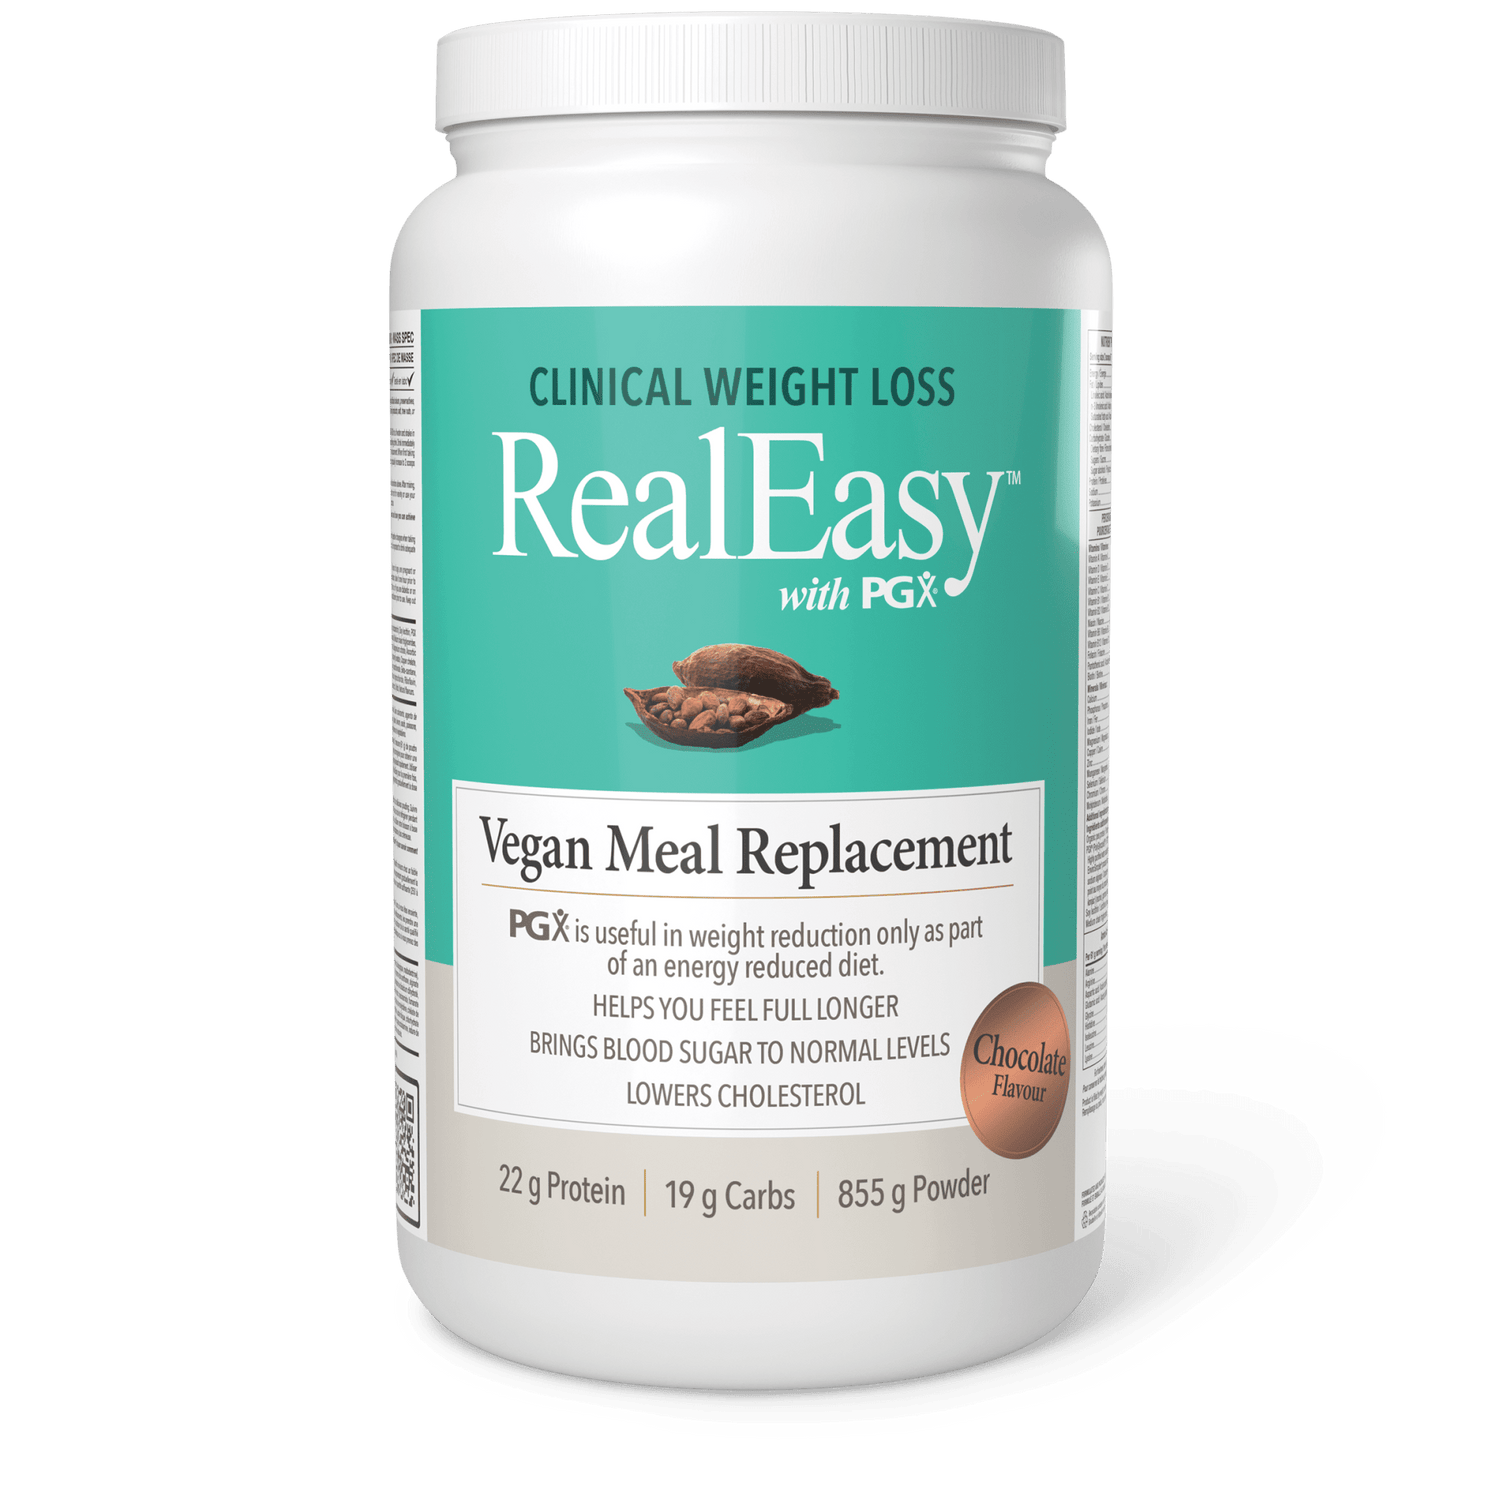 RealEasy with PGX Vegan Meal Replacement, Chocolate, Natural Factors|v|image|3609